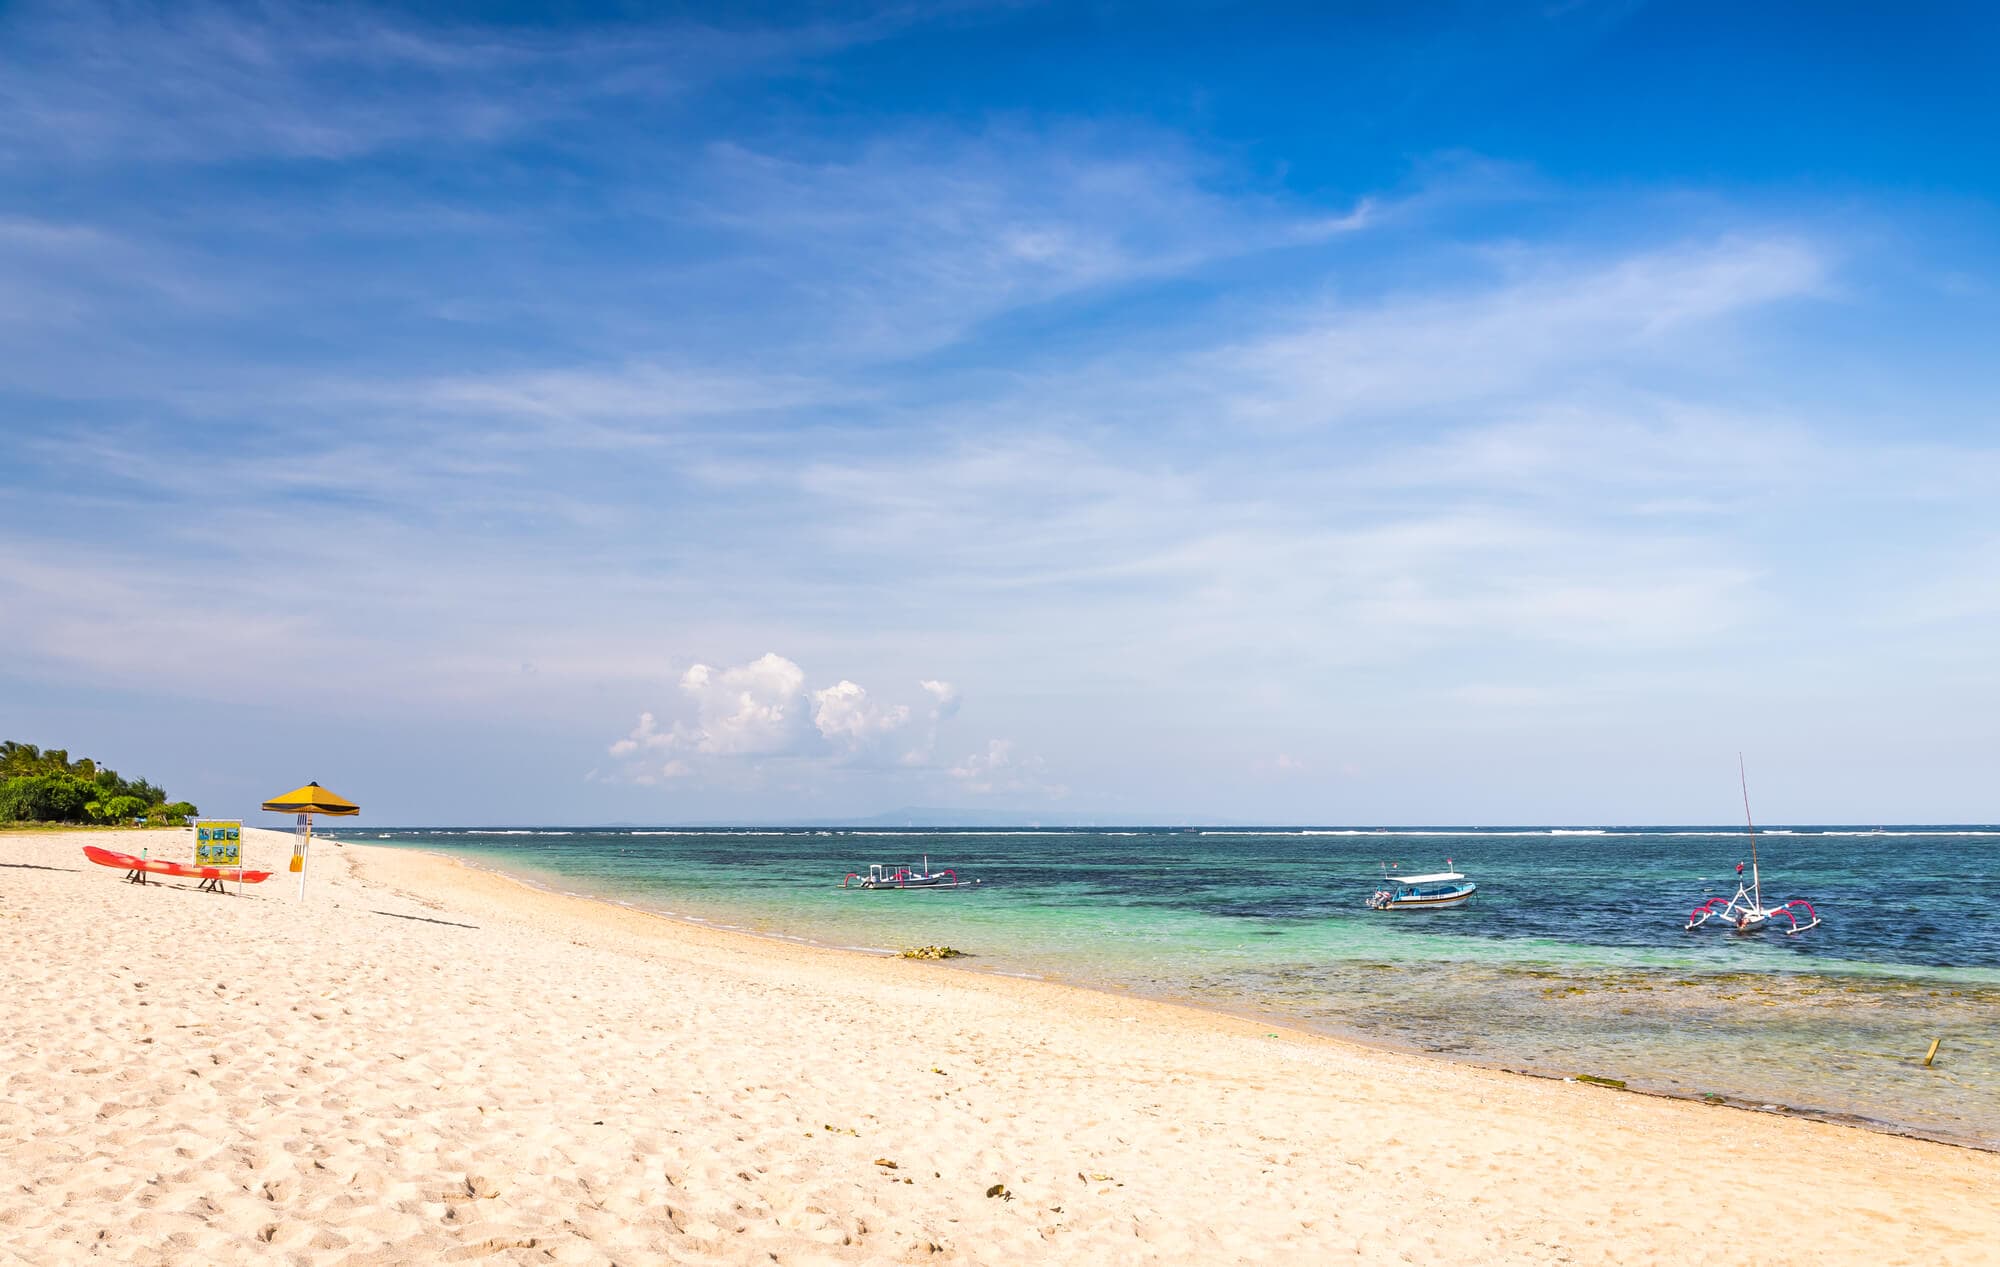 Where to stay in Bali: A complete guide to the different areas on the island - Nusa Dua Beach